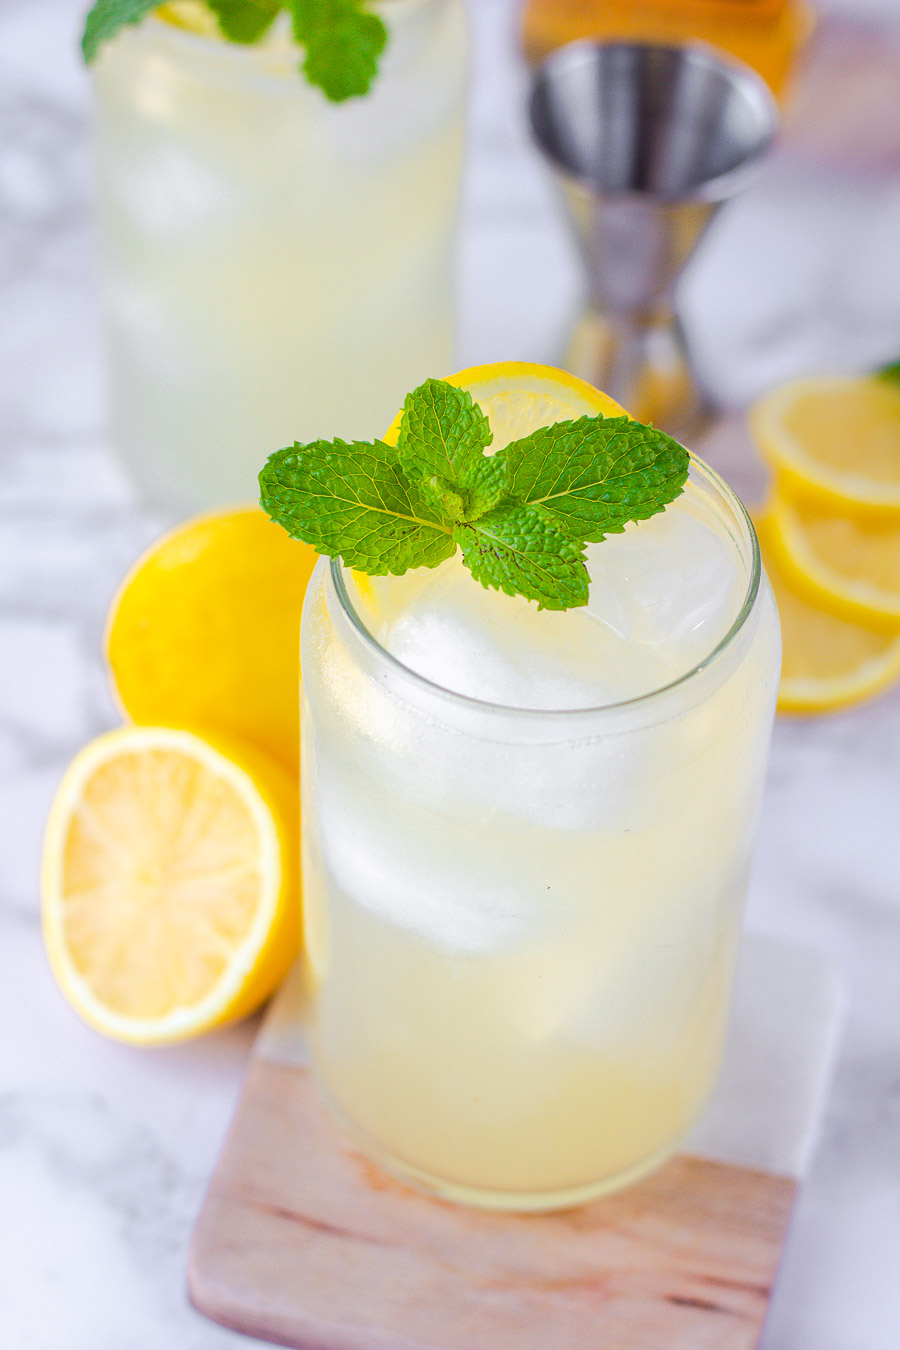 This irish lemonade cocktail is one of my favorite summer whiskey cocktails. It is so refreshing and couldn't be easier to make.